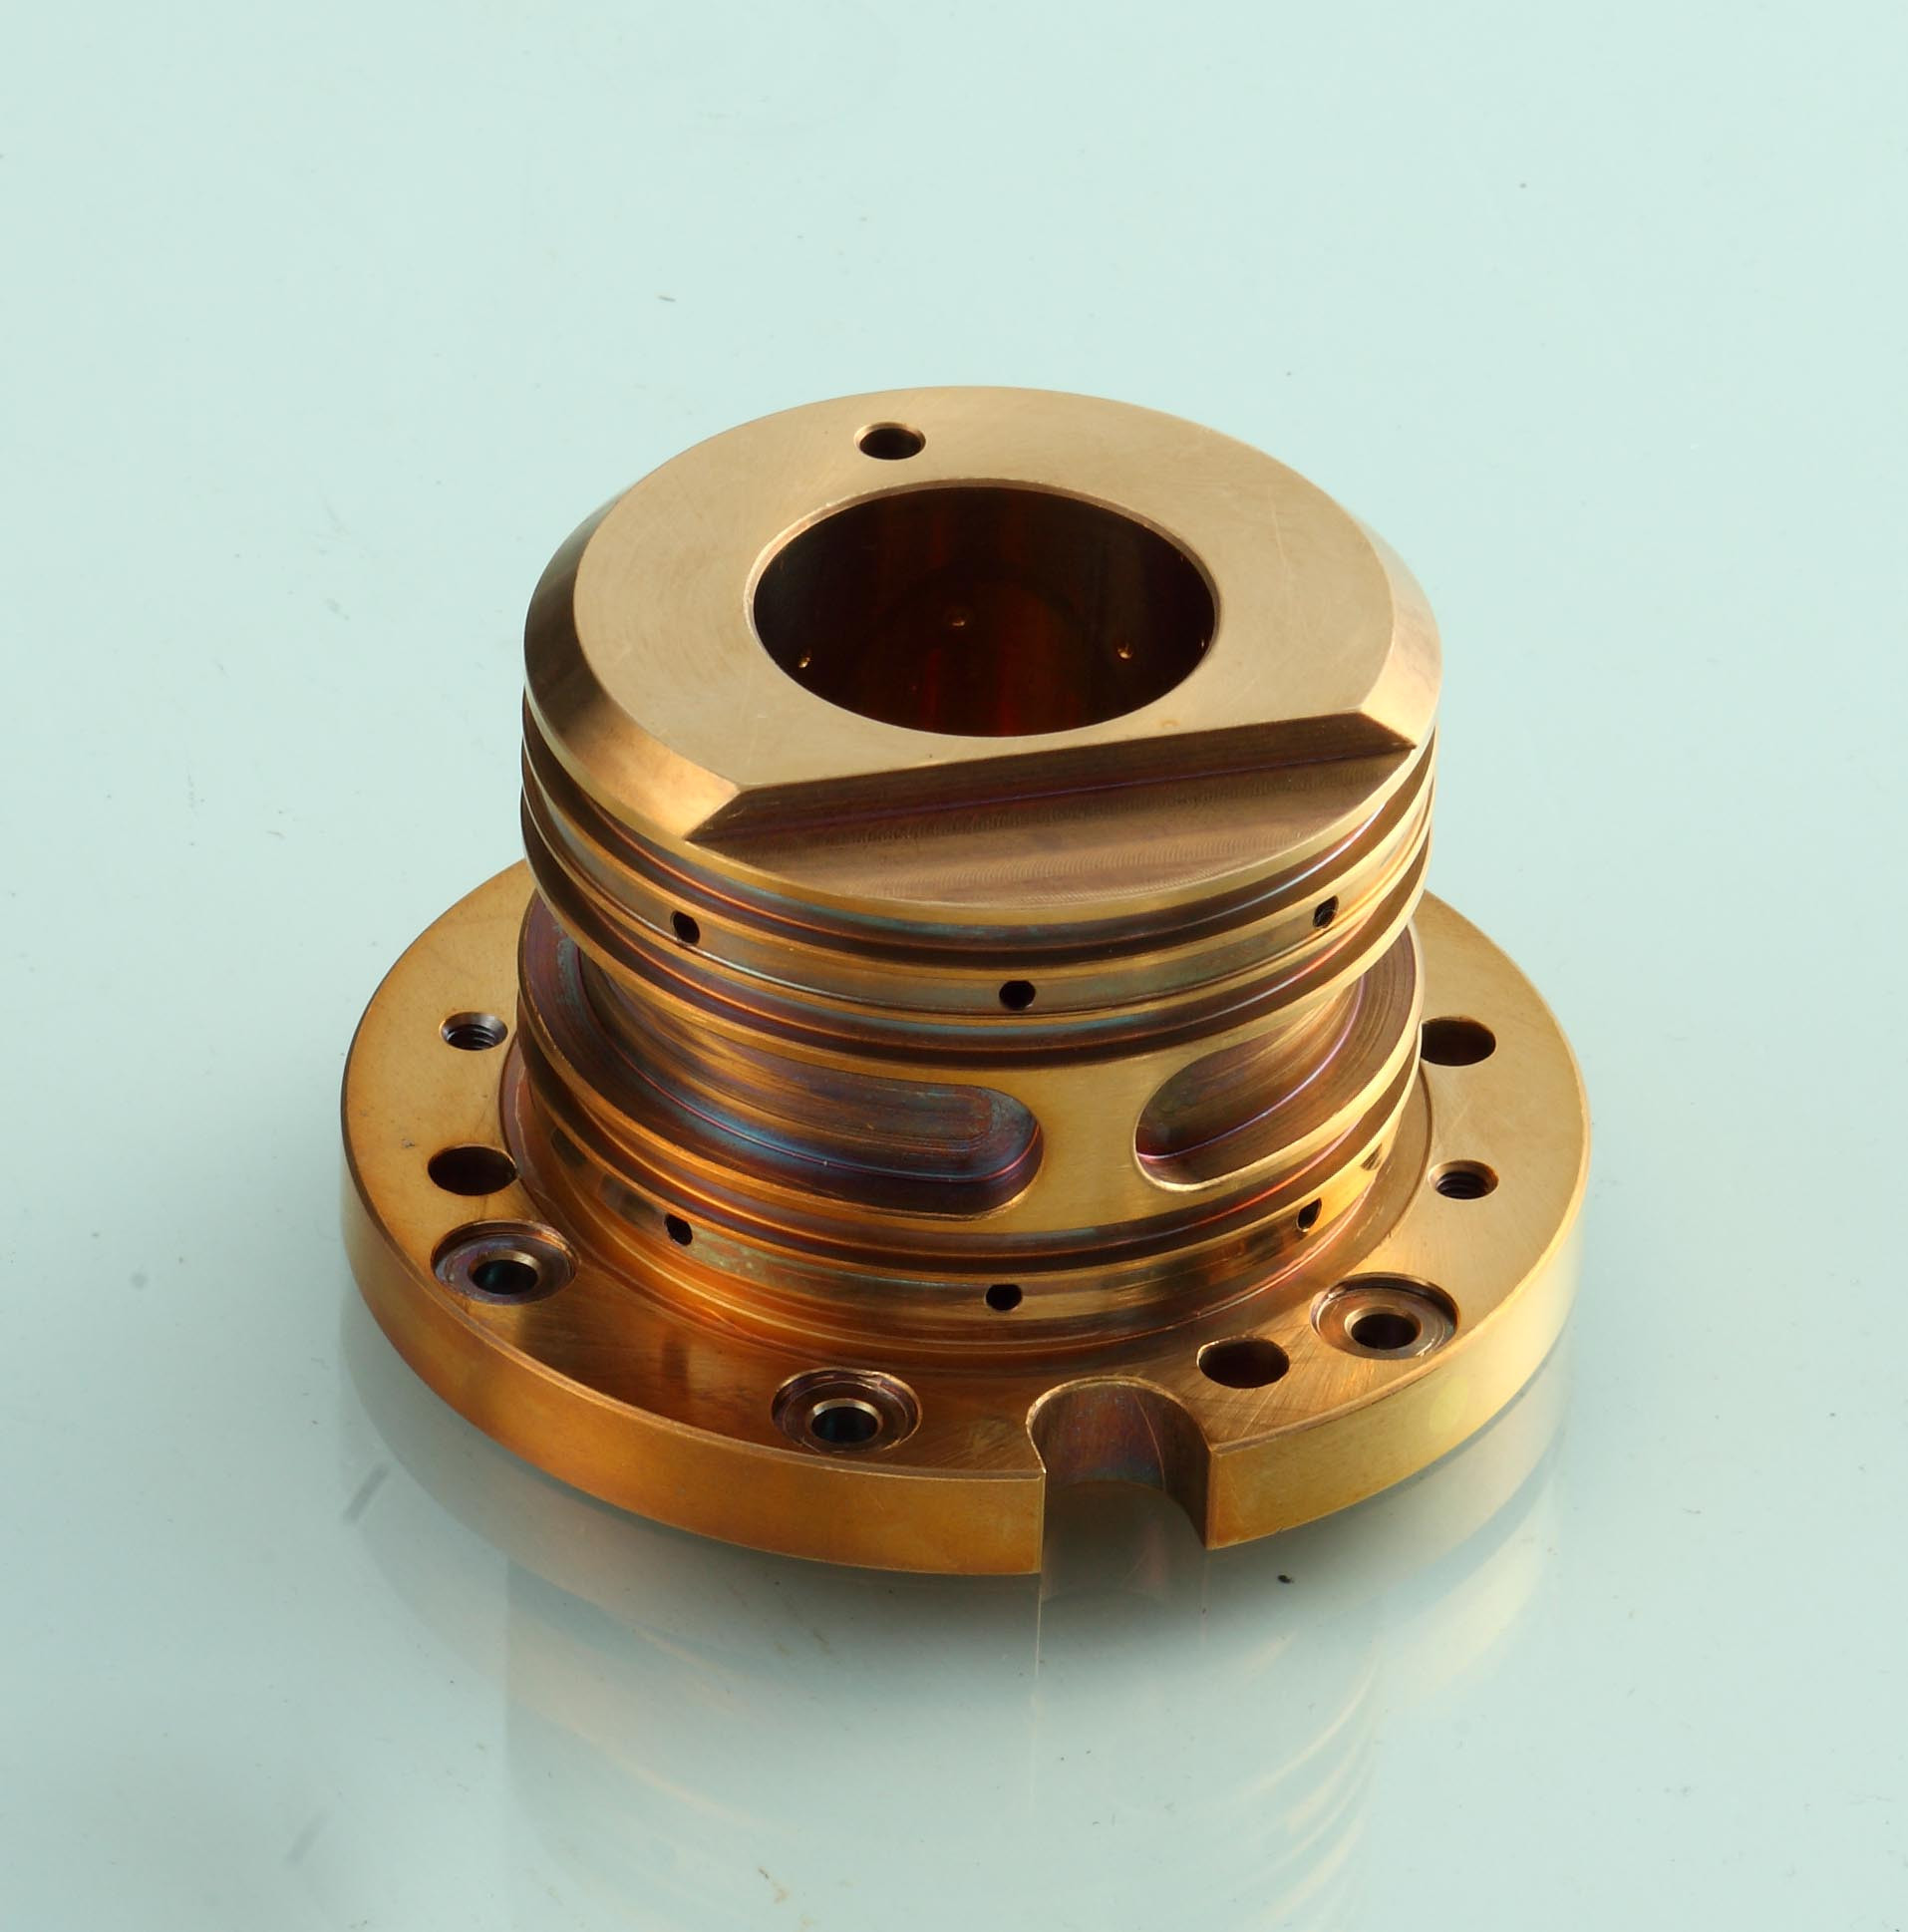  D1531 Westwind Front Air Bearing Dental Spindle 150000 Rpm Speed Long Bearing Life Manufactures